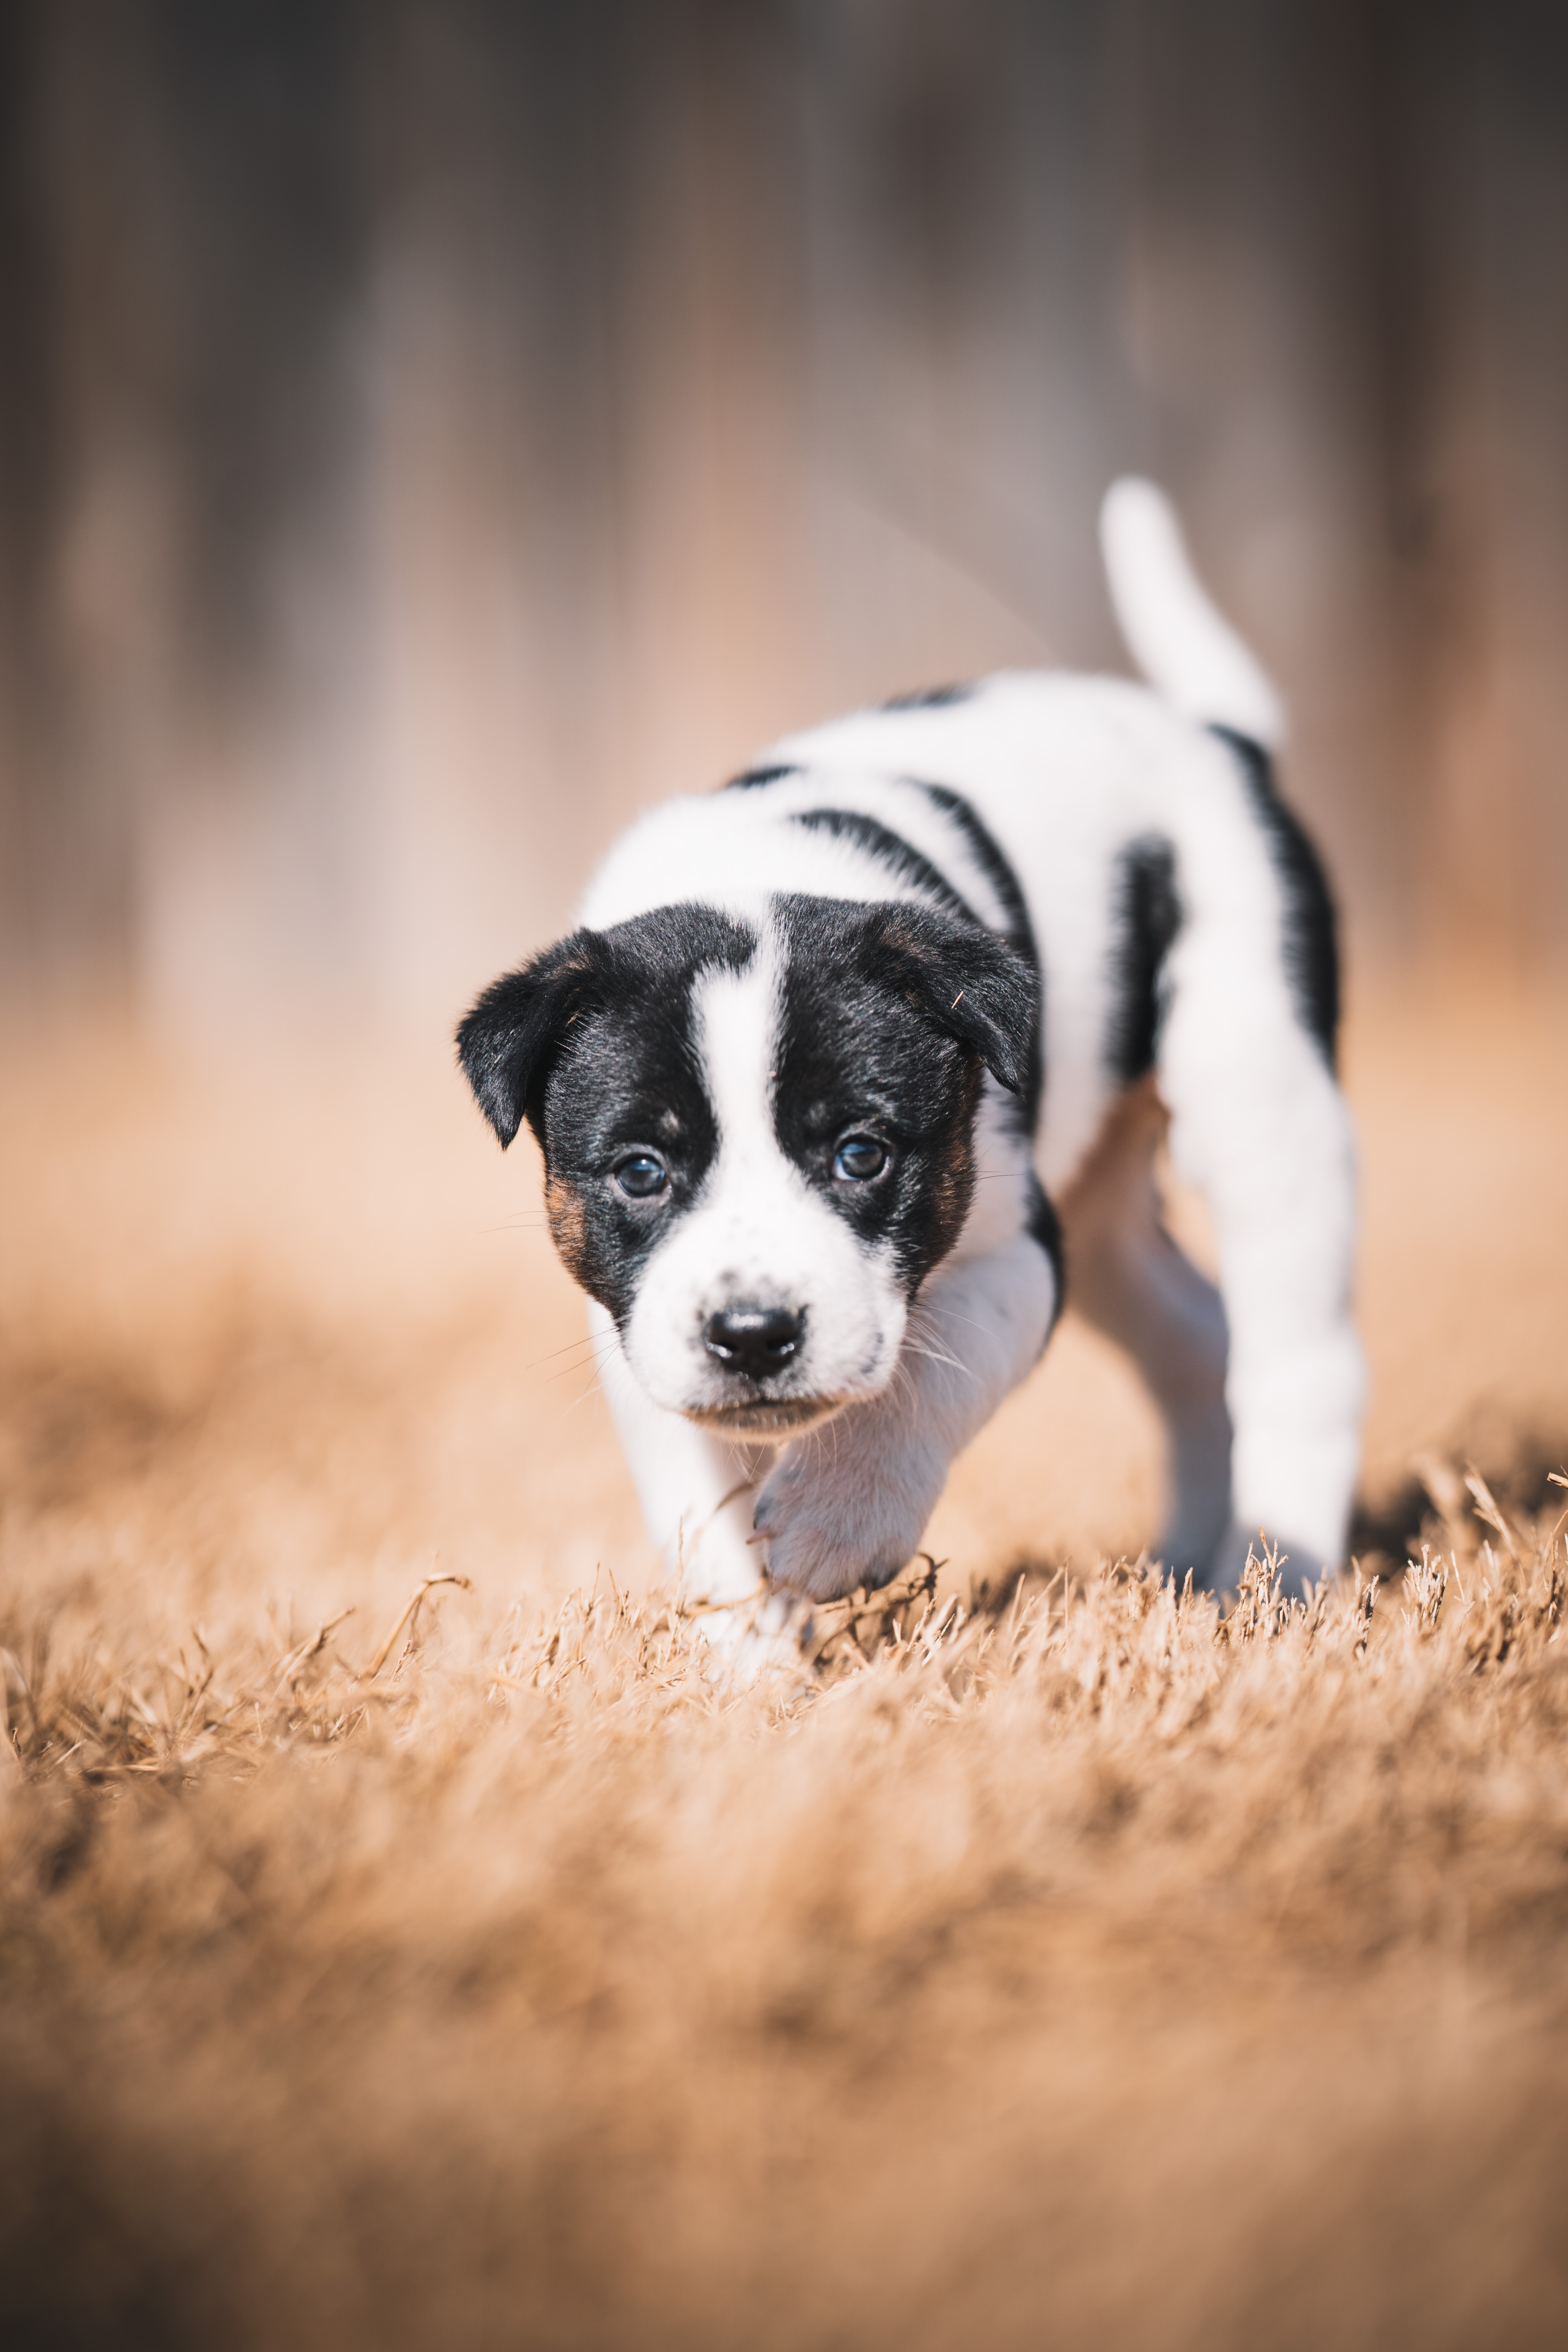 Sell Puppies Online 🐶 - Puppies Near You for Sale | Pawbe 🐾